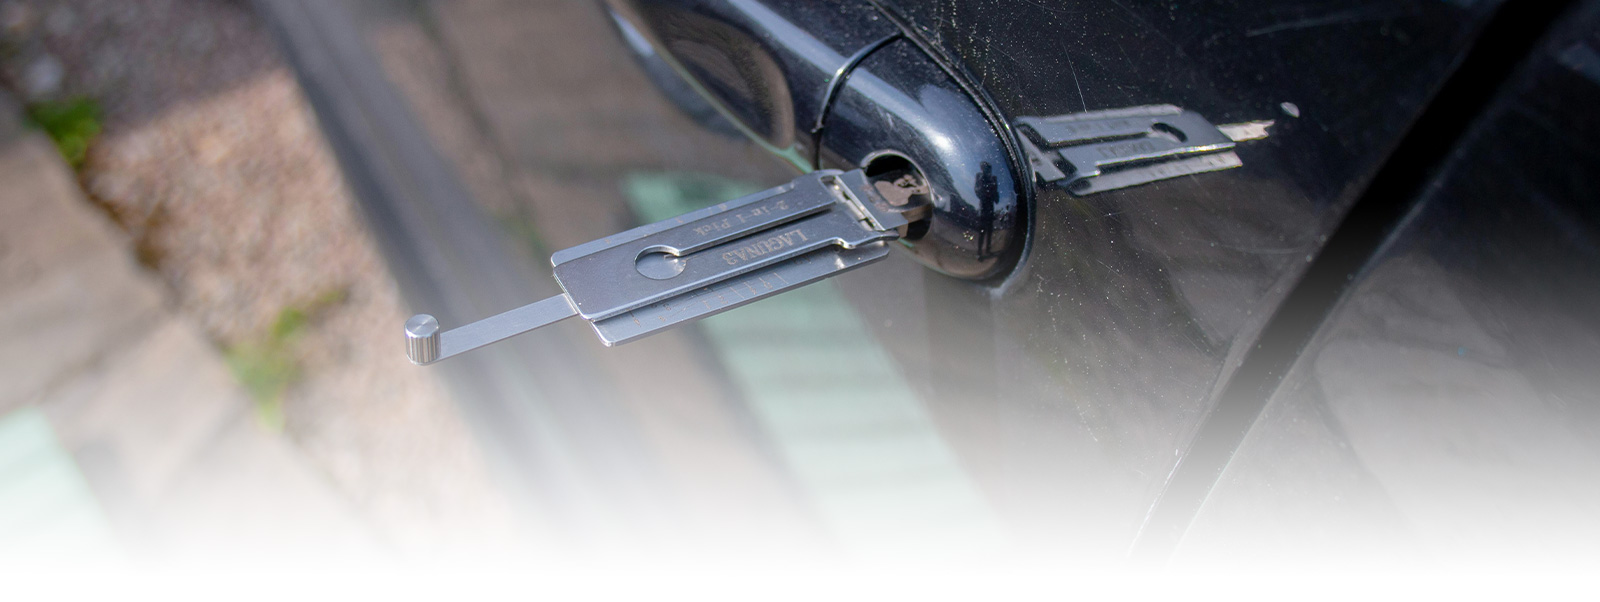 Absolute Security Locksmiths offers a wide range of services to Kensington, CT and surrounding areas.